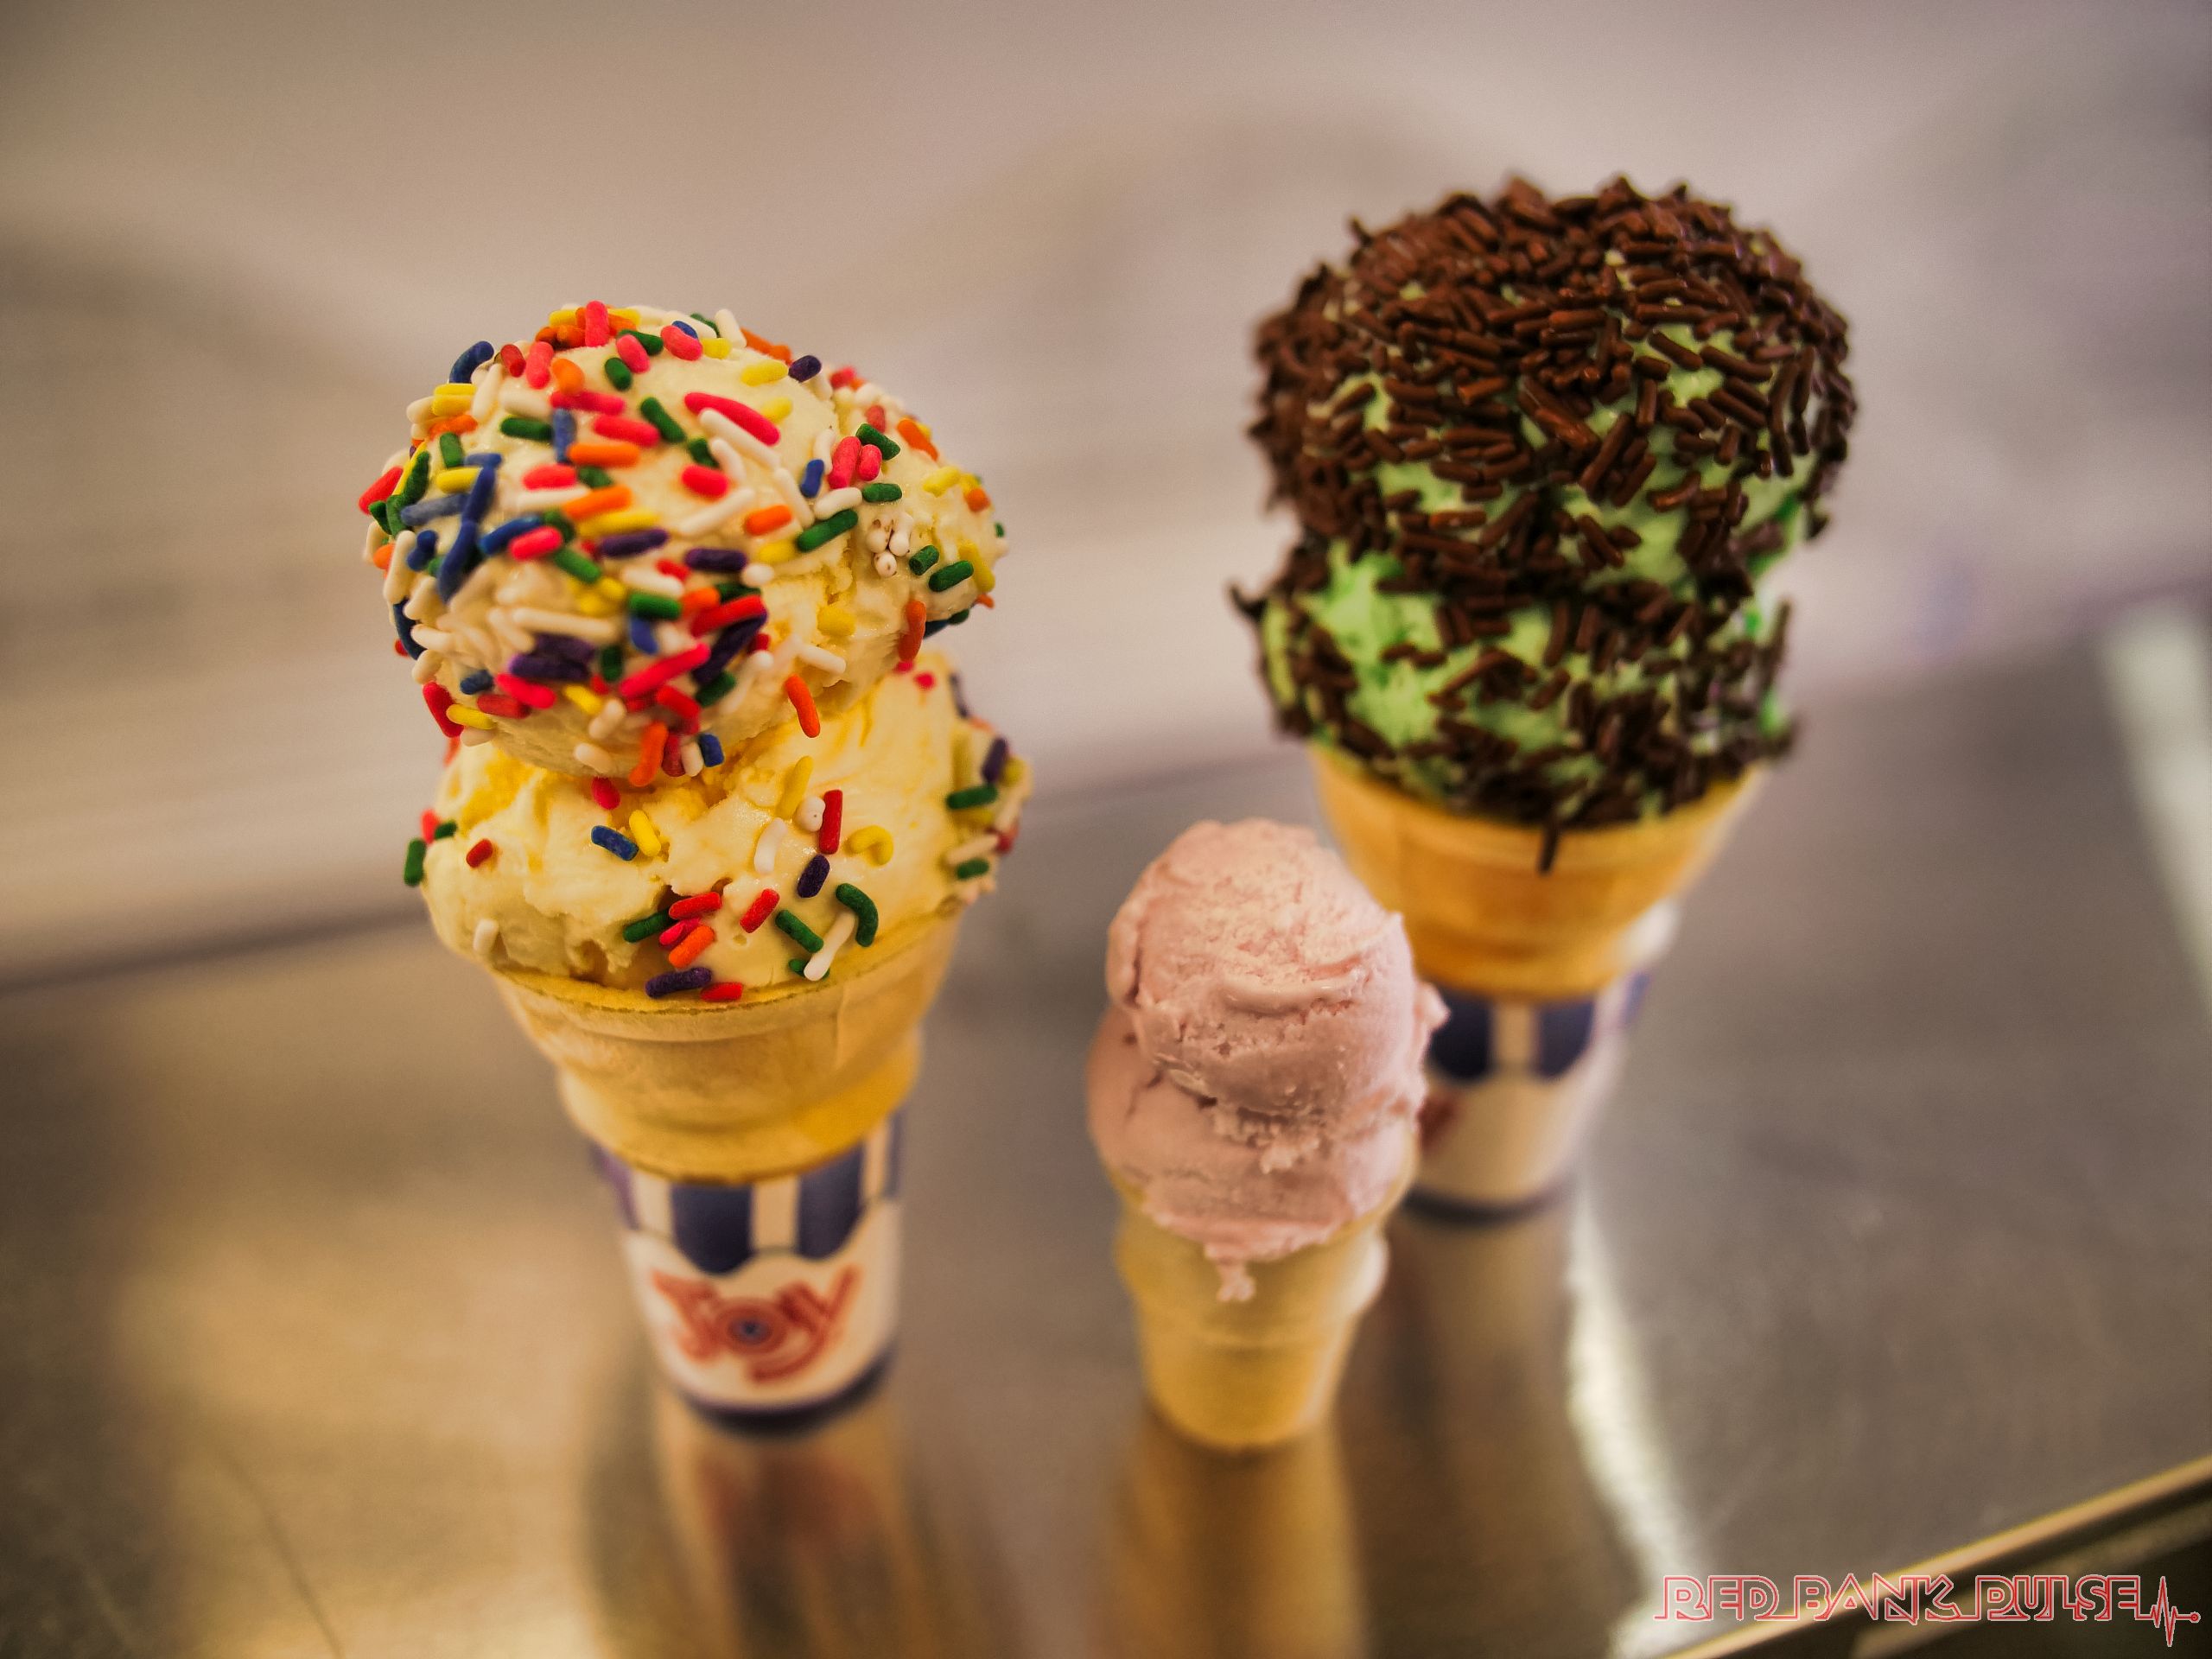 National Ice Cream Cone Day is on September 22nd! Here are some places